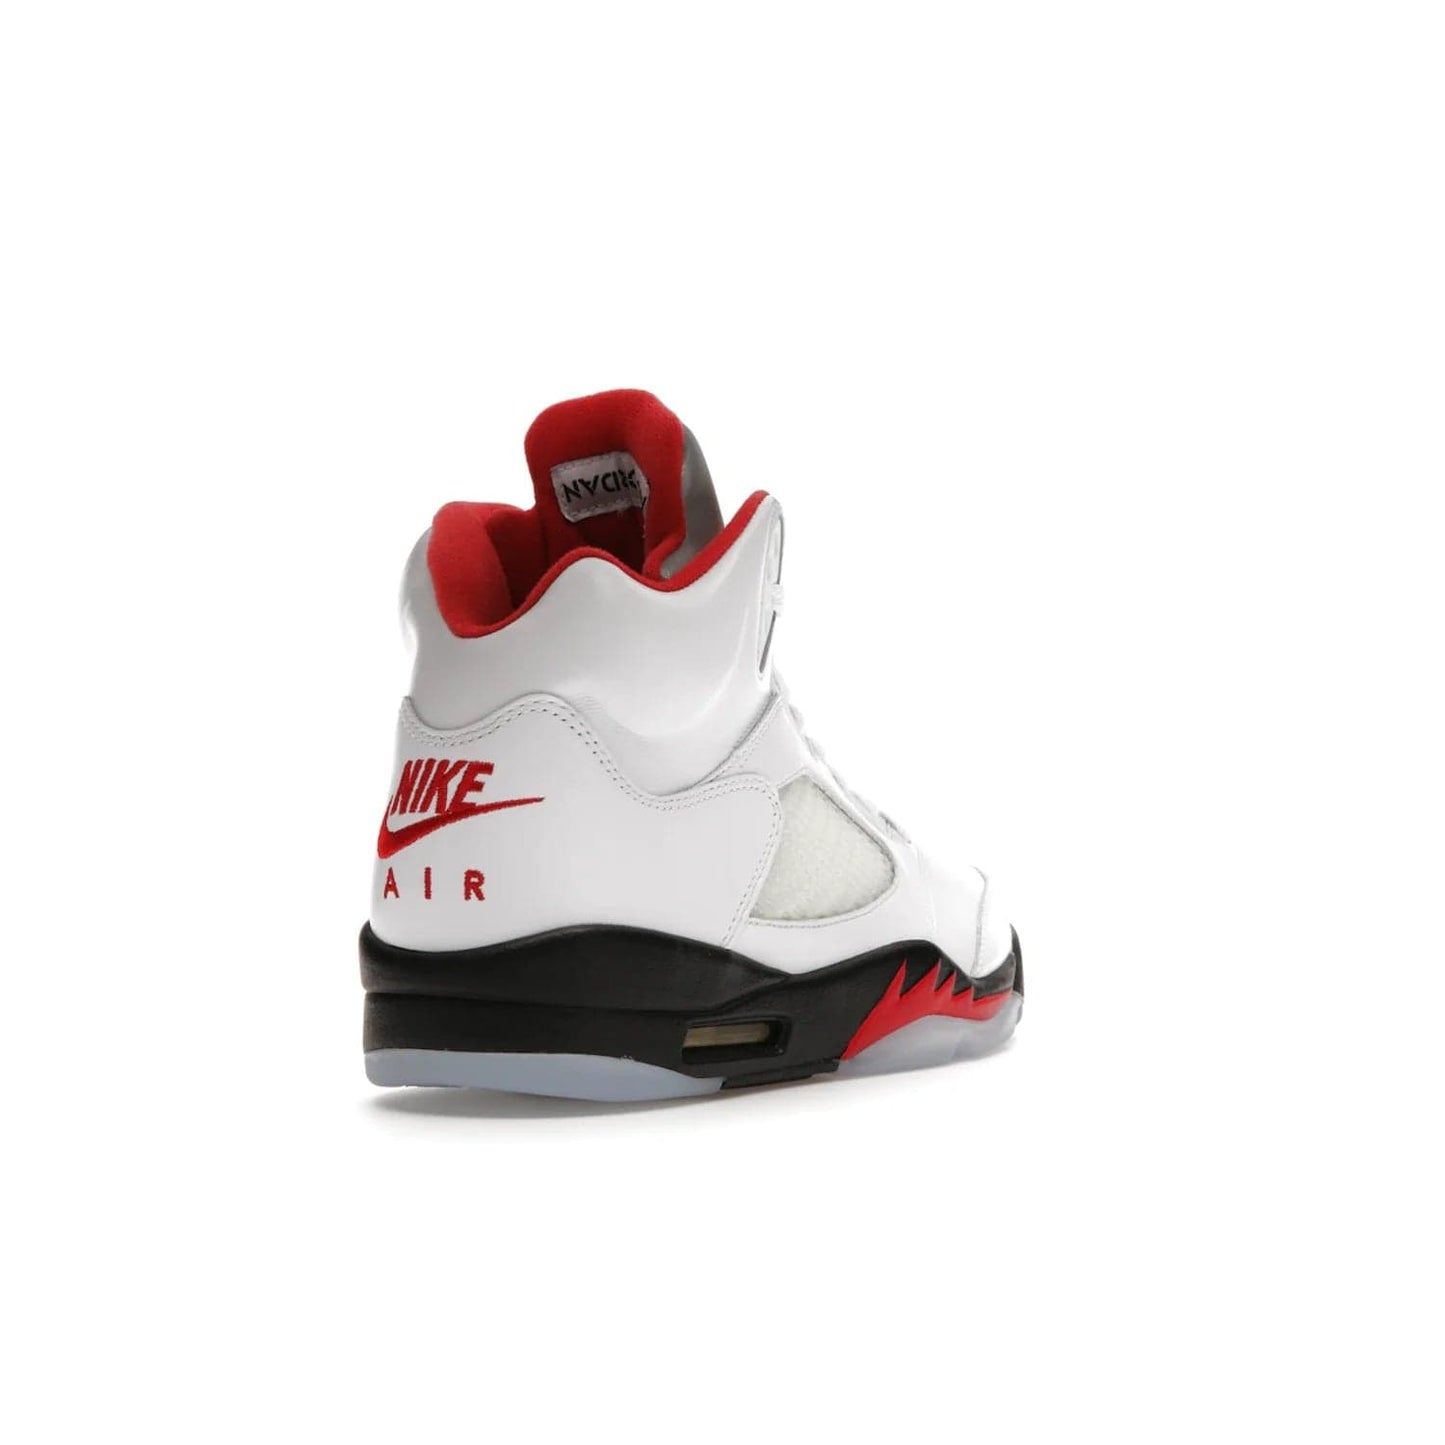 Jordan 5 Retro Fire Red Silver Tongue (2020) - Image 31 - Only at www.BallersClubKickz.com - Experience classic styling with the Jordan 5 Retro Fire Red Silver Tongue (2020). Features a white leather upper, 3M reflective tongue, midsole colorblocking, and an icy translucent outsole. Now available, upgrade your shoe collection today.